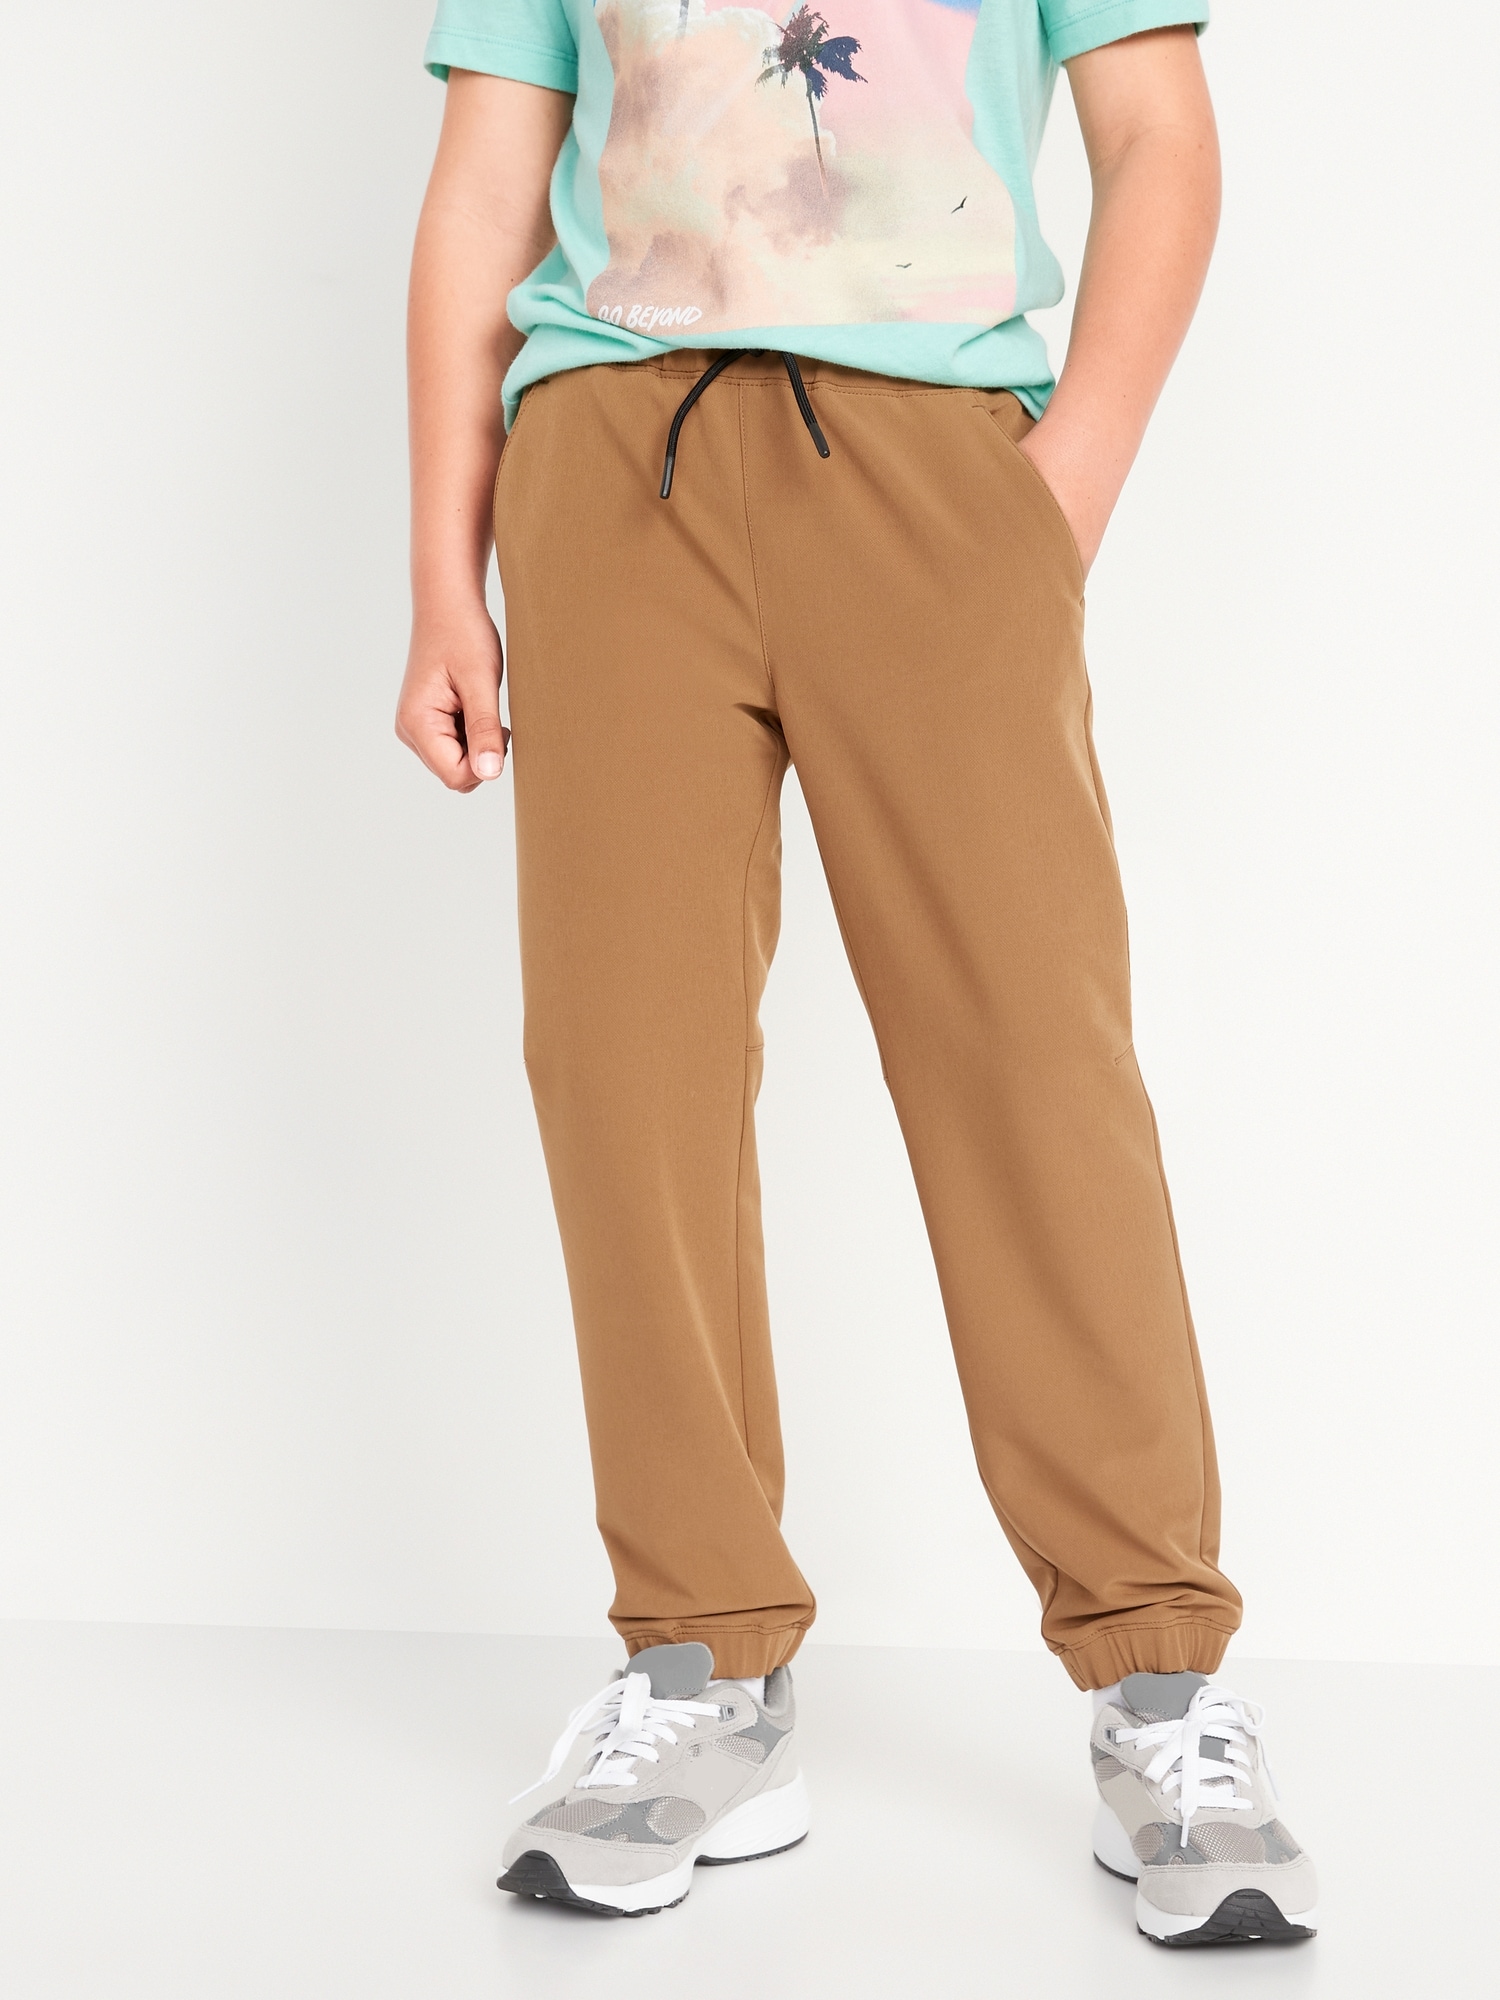 Old Navy StretchTech Jogger Performance Pants for Boys brown. 1